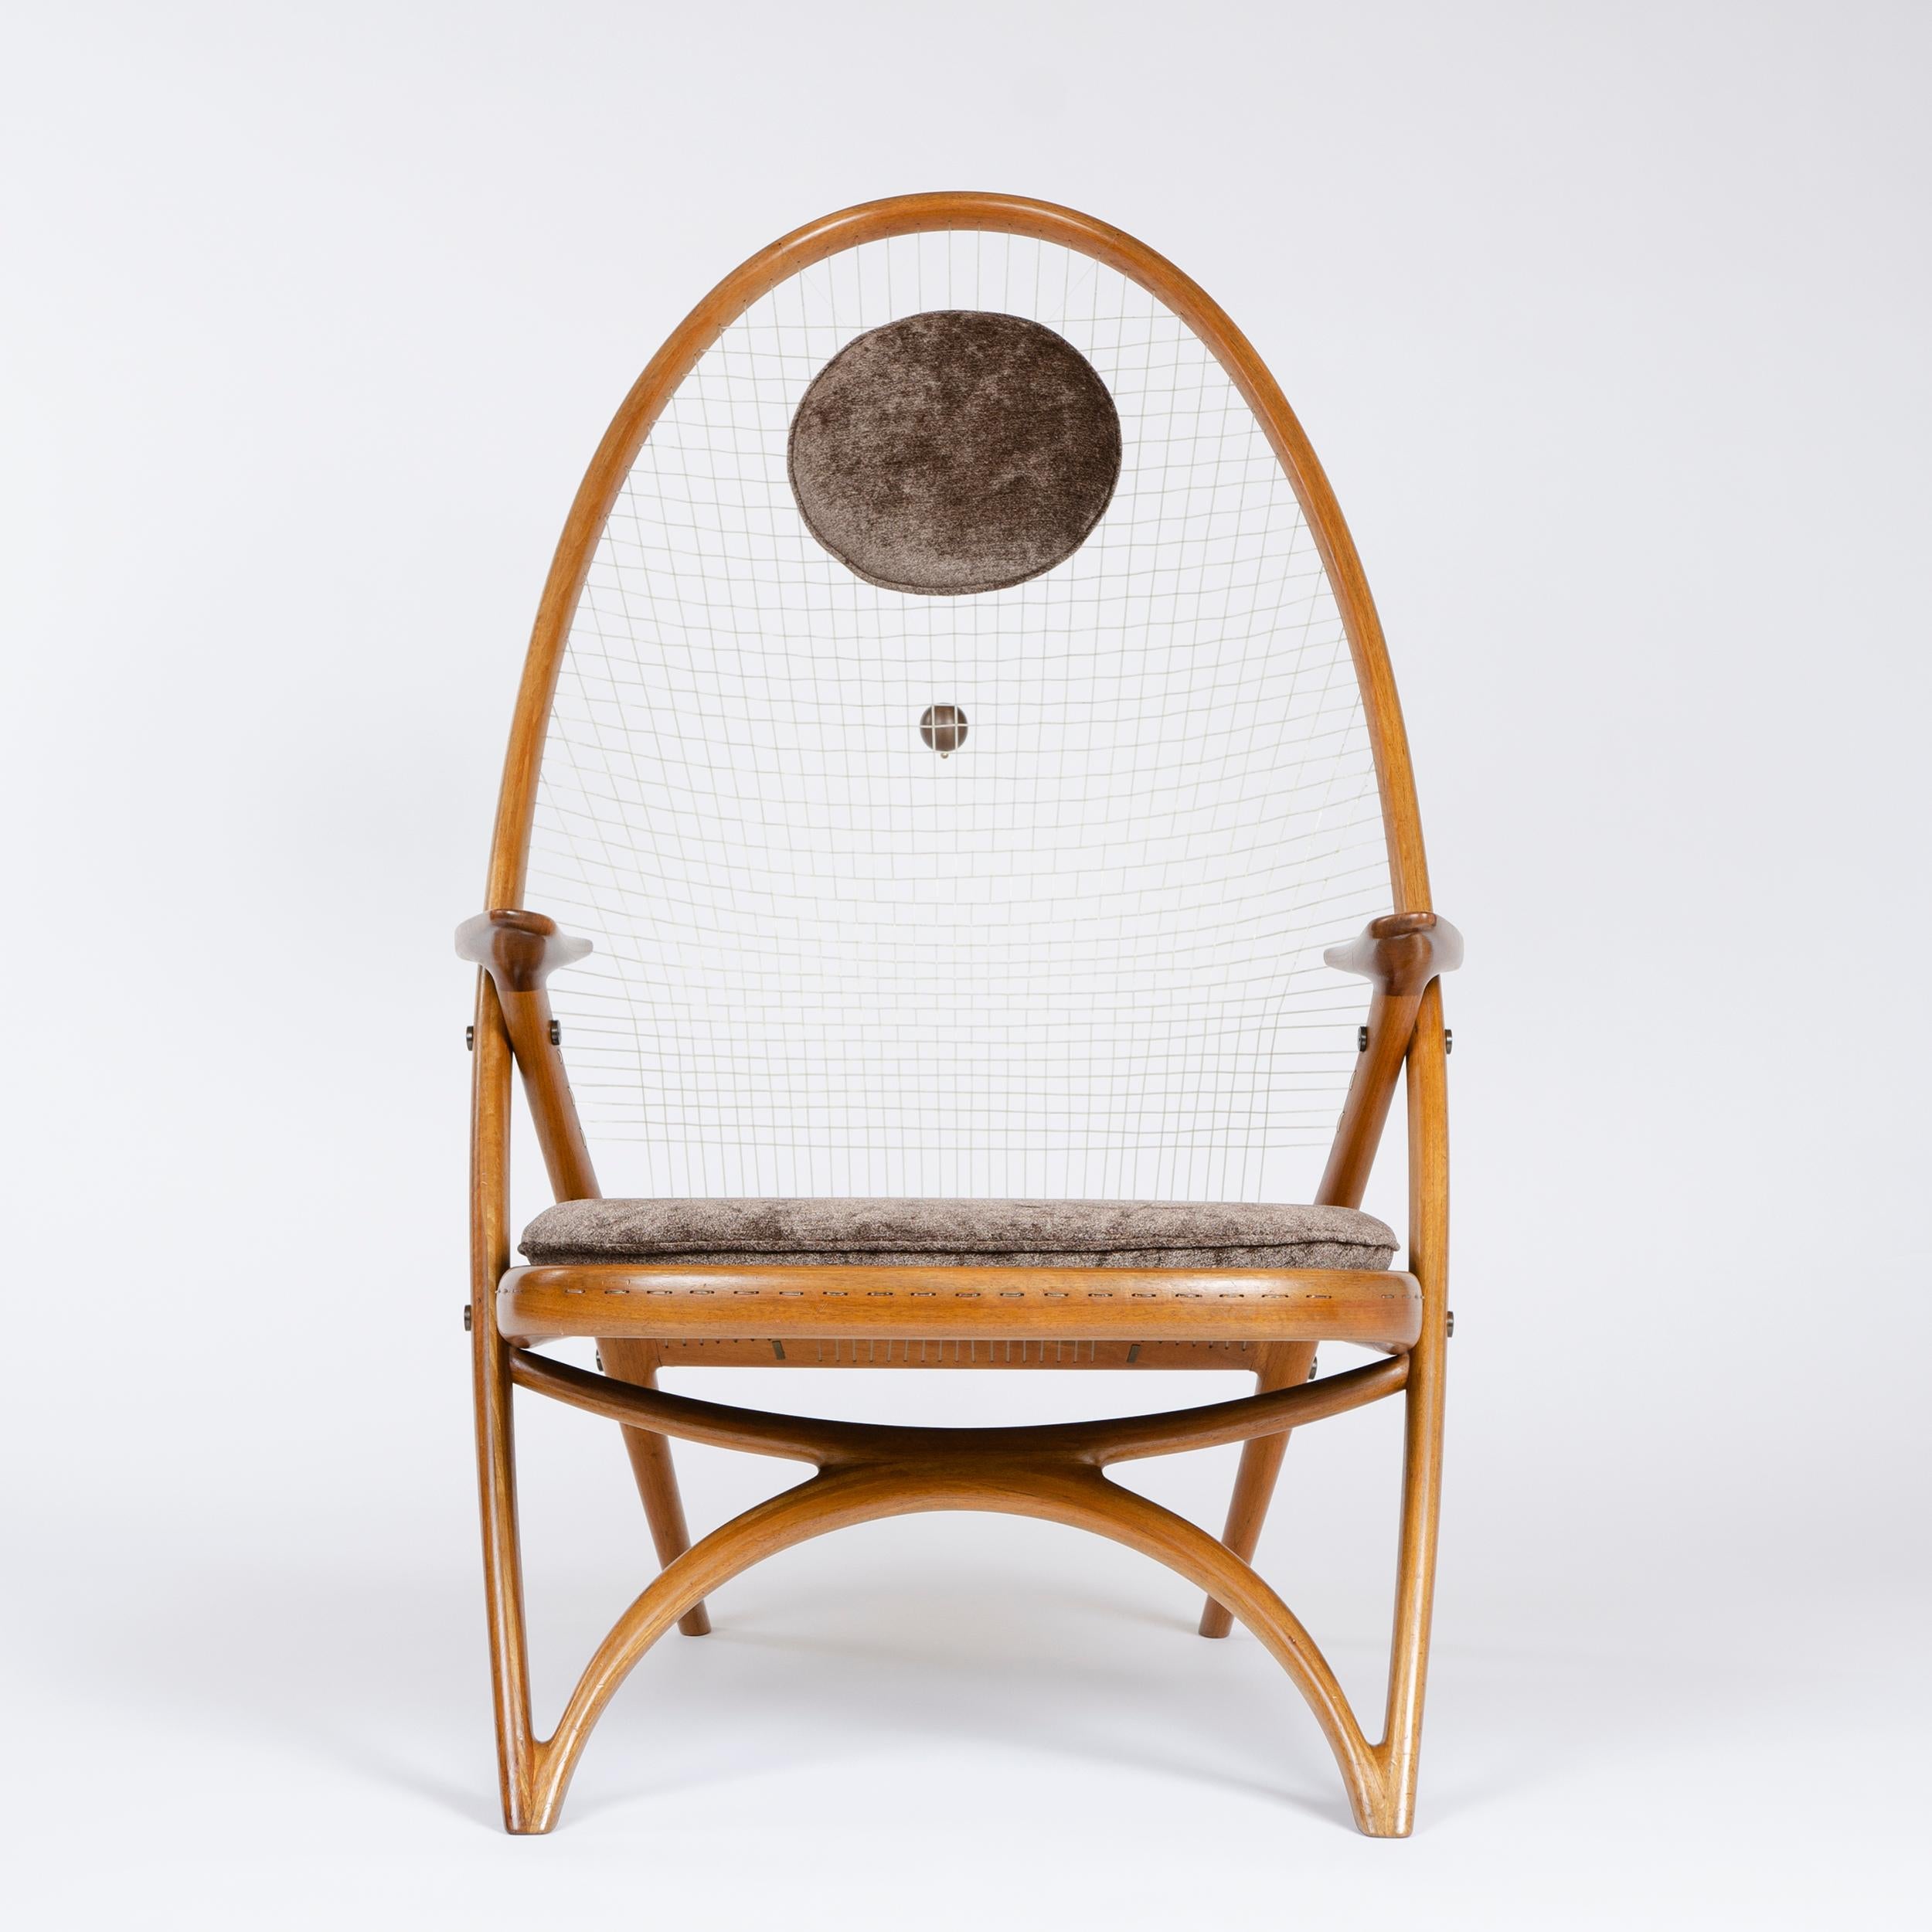 A rare easy chair designed by the architect Helge Vestergaard Jensen and executed by the cabinet-maker Peder Pedersen for the exhibition in 1955. The Racquet chair chair has distinct reminiscences of the Windsor chair though the modern lamination